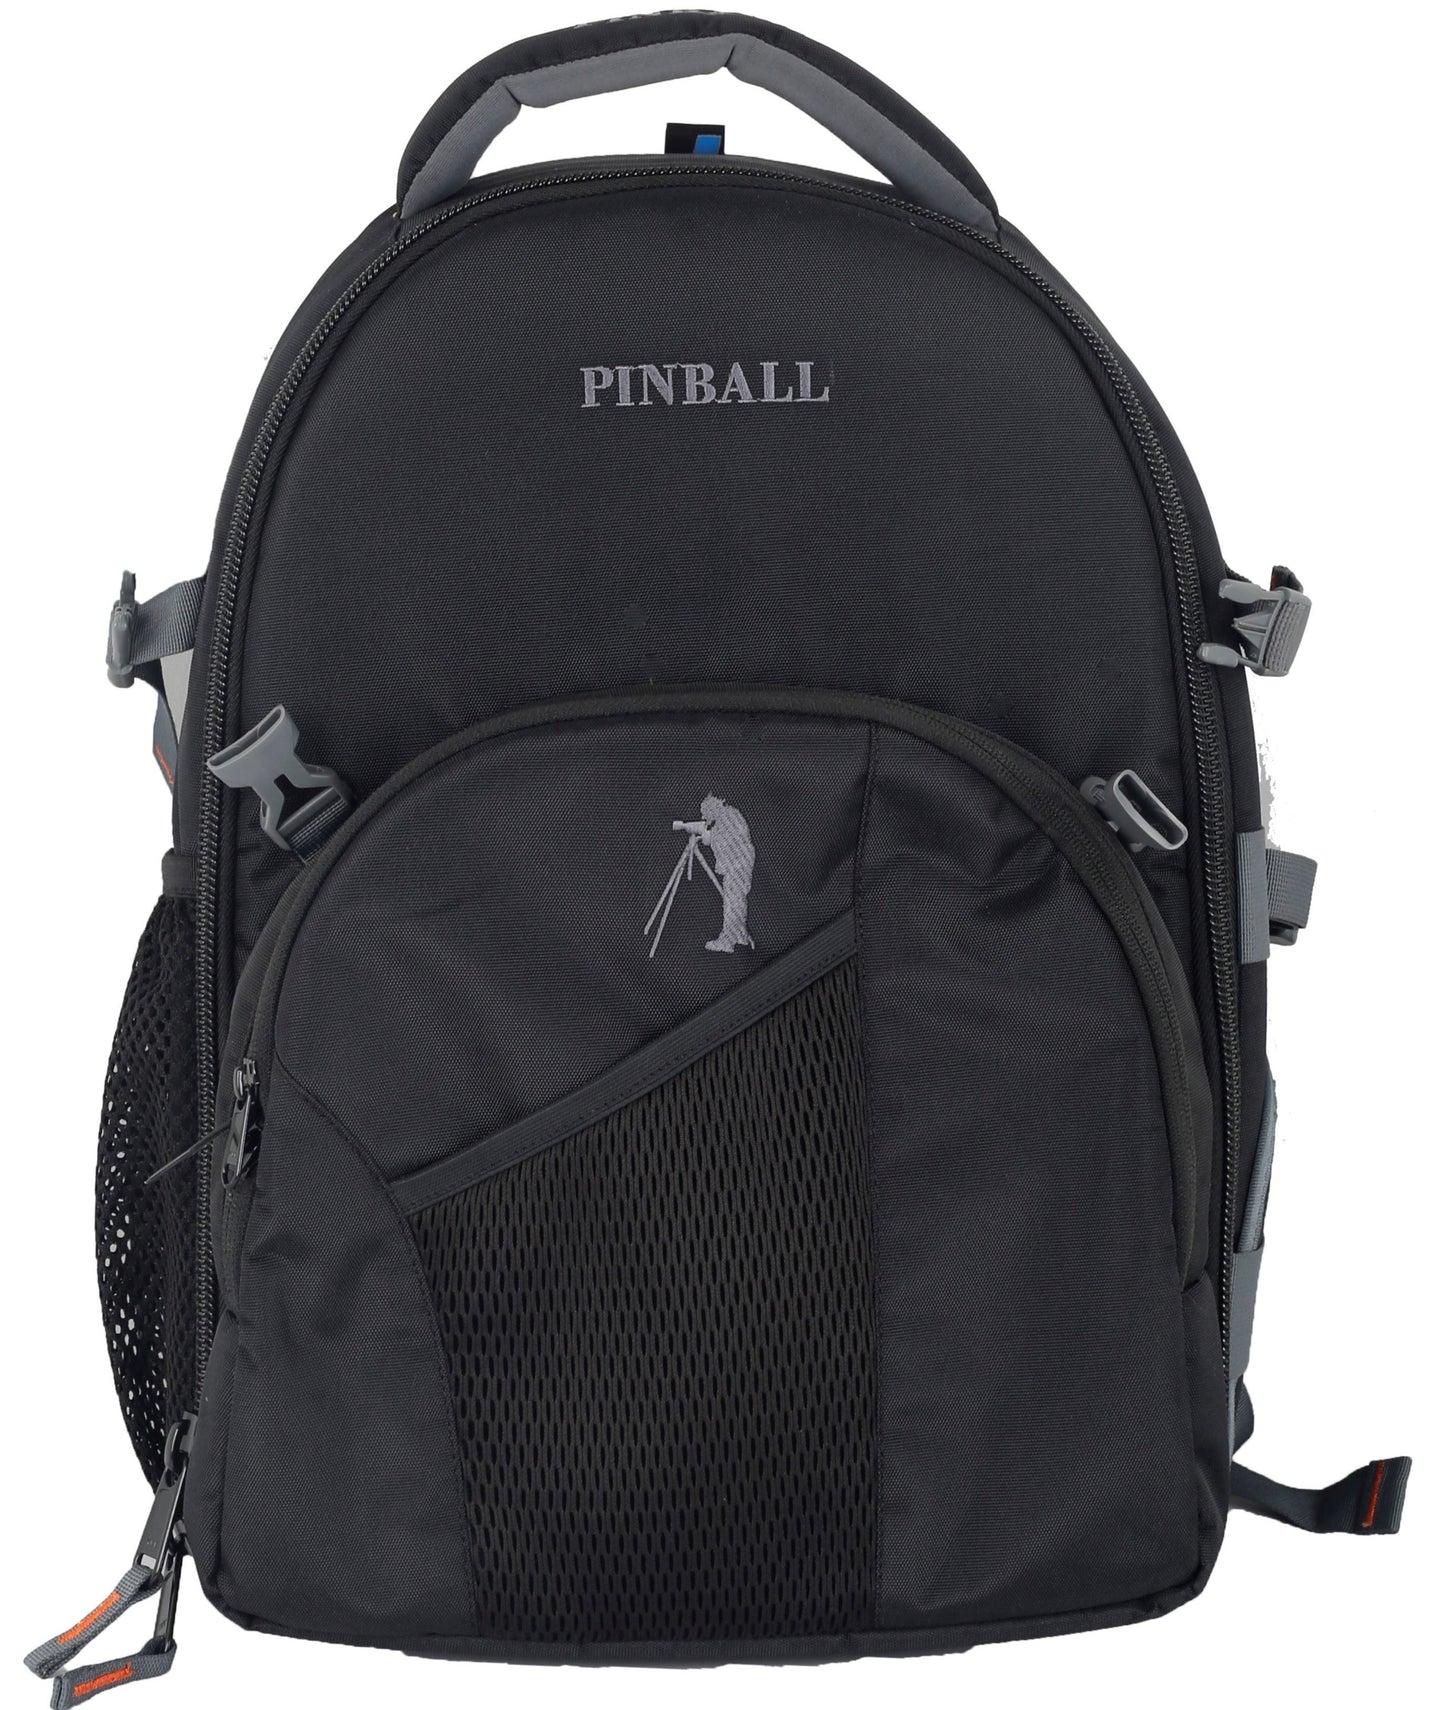 Image: Front view of the P33 Sniper DSLR camera backpack, showcasing its durable and sleek design. The backpack features multiple compartments and pockets for convenient storage and organization of camera gear. With its PINBALL protection and waterproof construction, the P33 Sniper ensures reliable security and protection for photographers on the move.